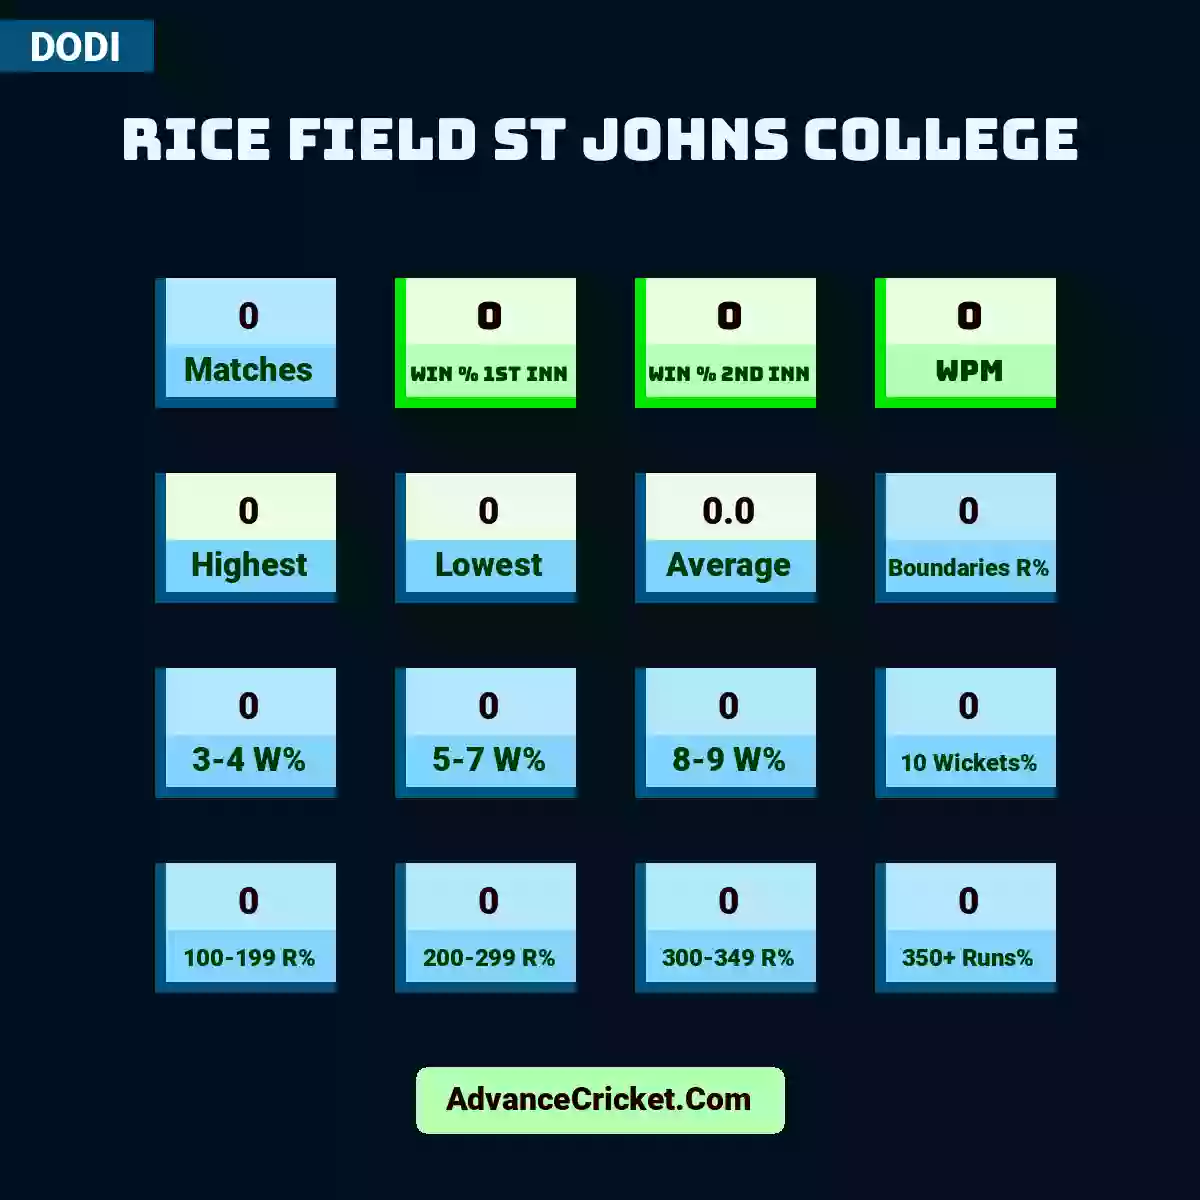 Image showing Rice Field St Johns College with Matches: 0, Win % 1st Inn: 0, Win % 2nd Inn: 0, WPM: 0, Highest: 0, Lowest: 0, Average: 0.0, Boundaries R%: 0, 3-4 W%: 0, 5-7 W%: 0, 8-9 W%: 0, 10 Wickets%: 0, 100-199 R%: 0, 200-299 R%: 0, 300-349 R%: 0, 350+ Runs%: 0.